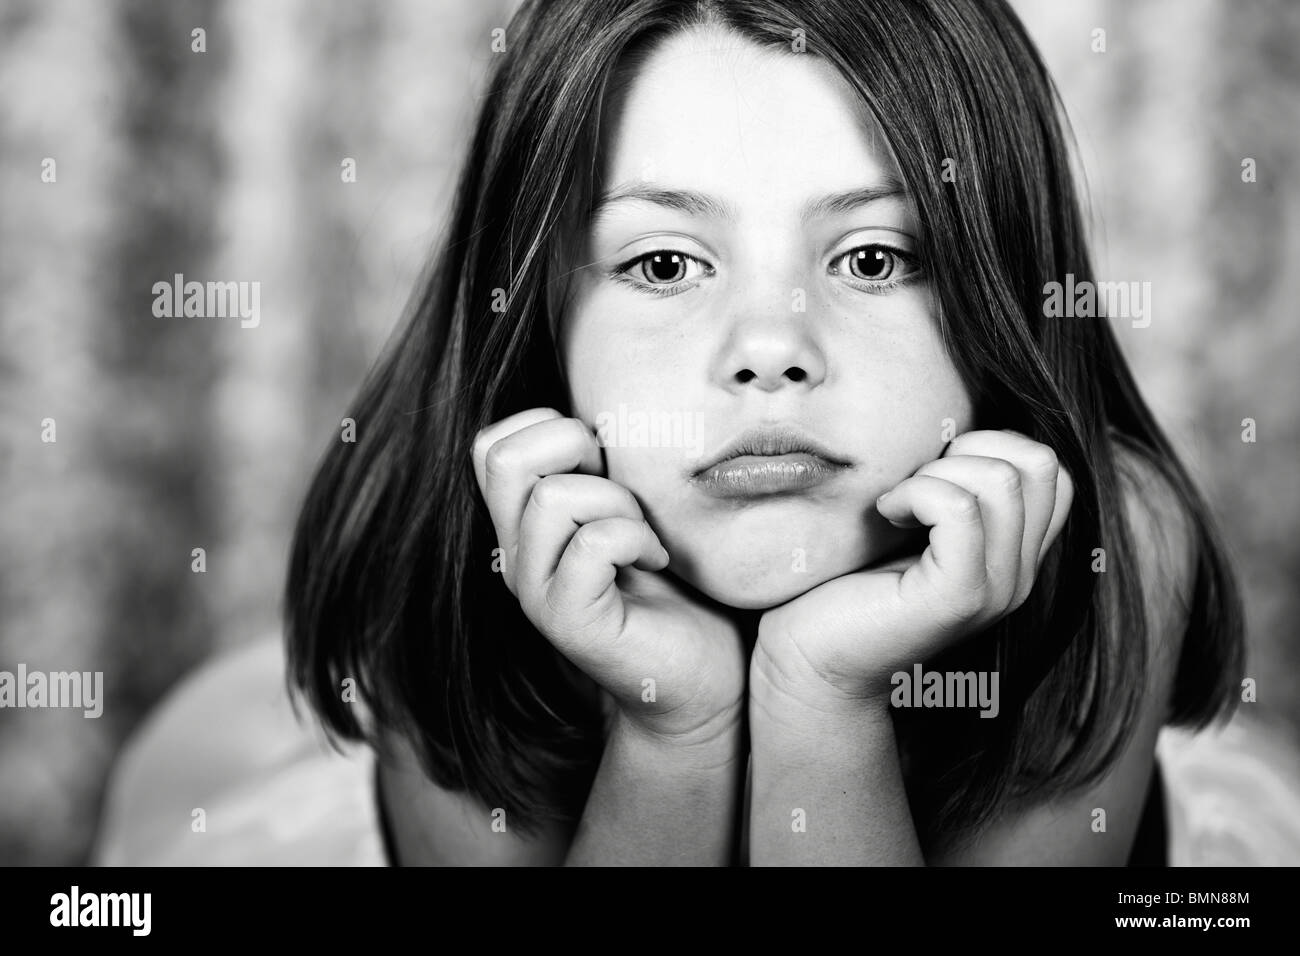 Powerful Black and White Image of a Pretty Young Child Thinking Stock Photo